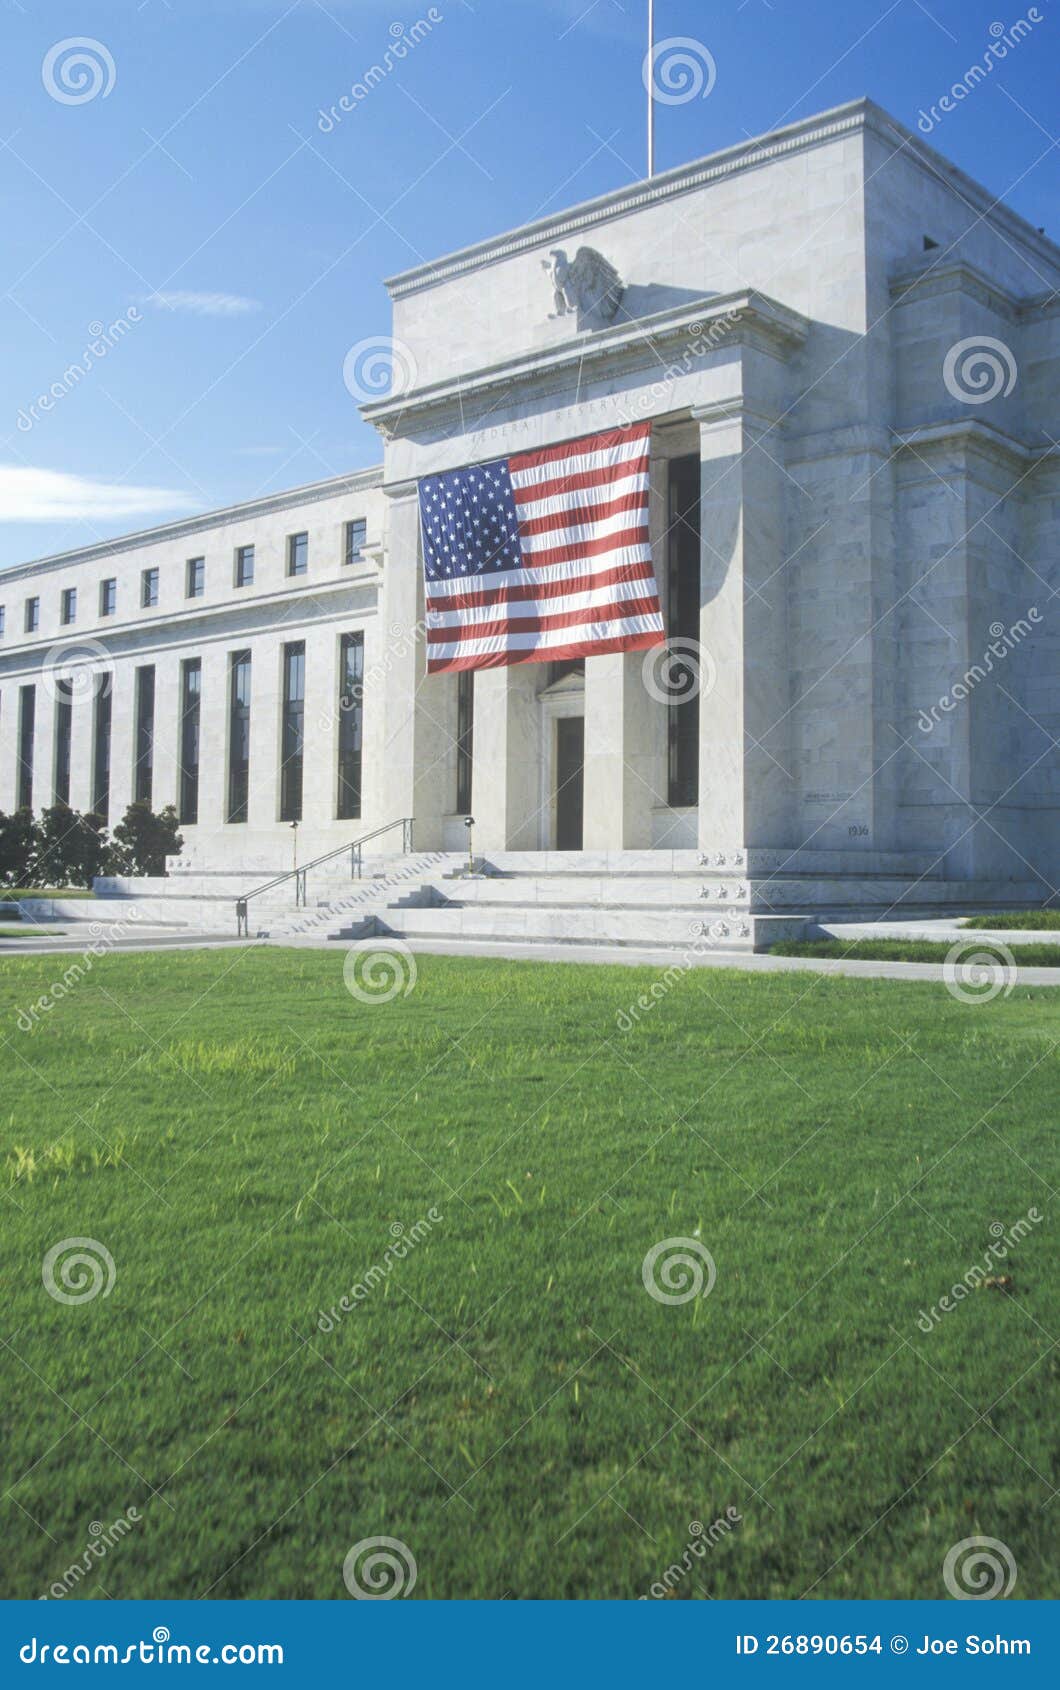 the federal reserve bank